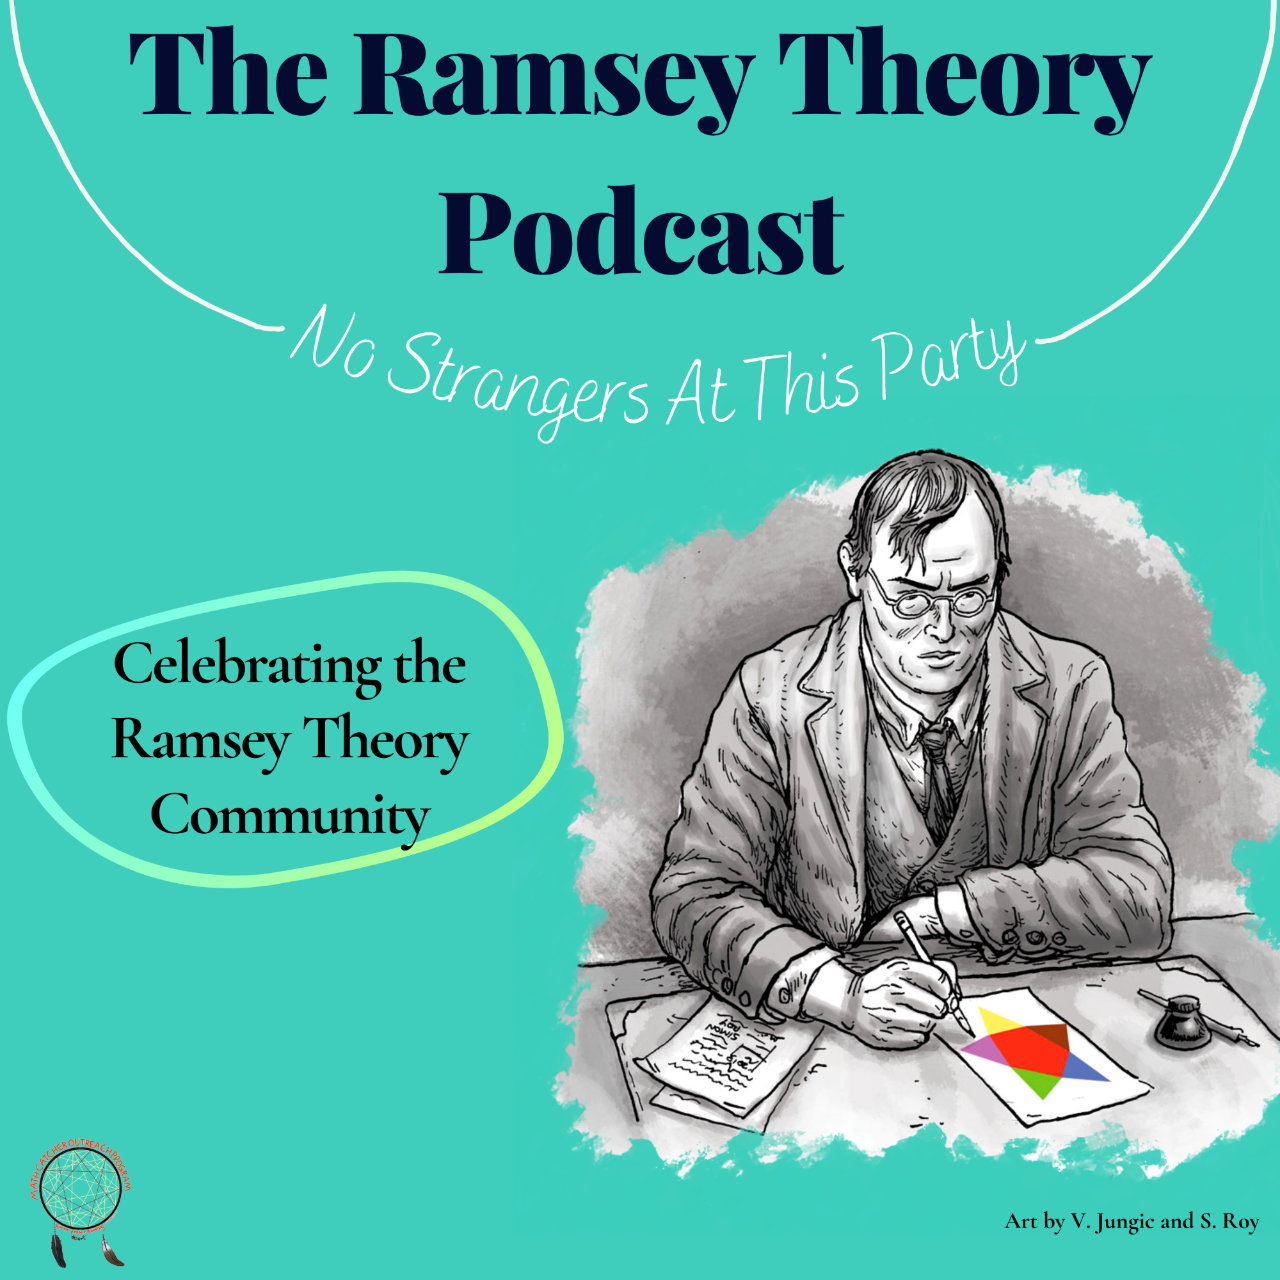 A turquoise graphic that displays a drawing of Frank Ramsey with "Art by V. Jungic and S. Roy" underneath the drawing. The graphic says: "The Ramsey Theory Podcast: No Strangers At This Party" and "Celebrating the Ramsey Theory Community". The graphic has the Math Catcher Outreach logo in the bottom left corner.